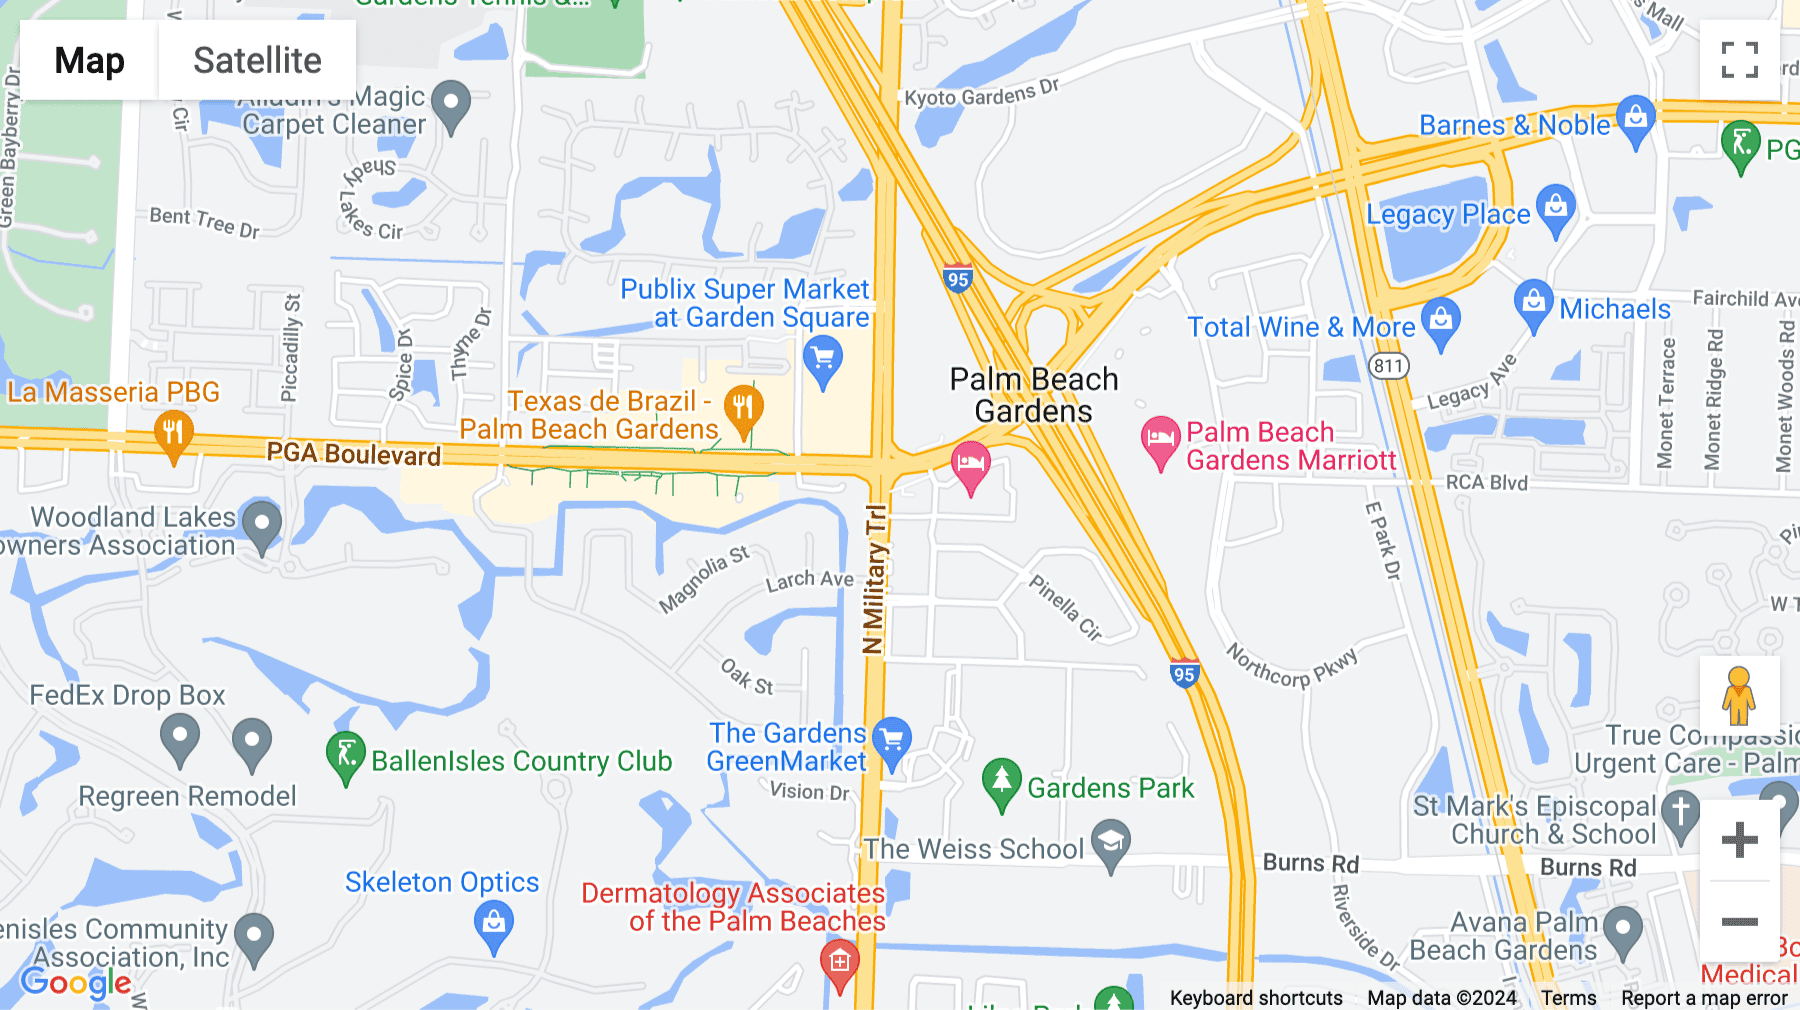 Click for interative map of 4440 PGA Blvd, Suite 600, Suite 600, Palm Beach Gardens